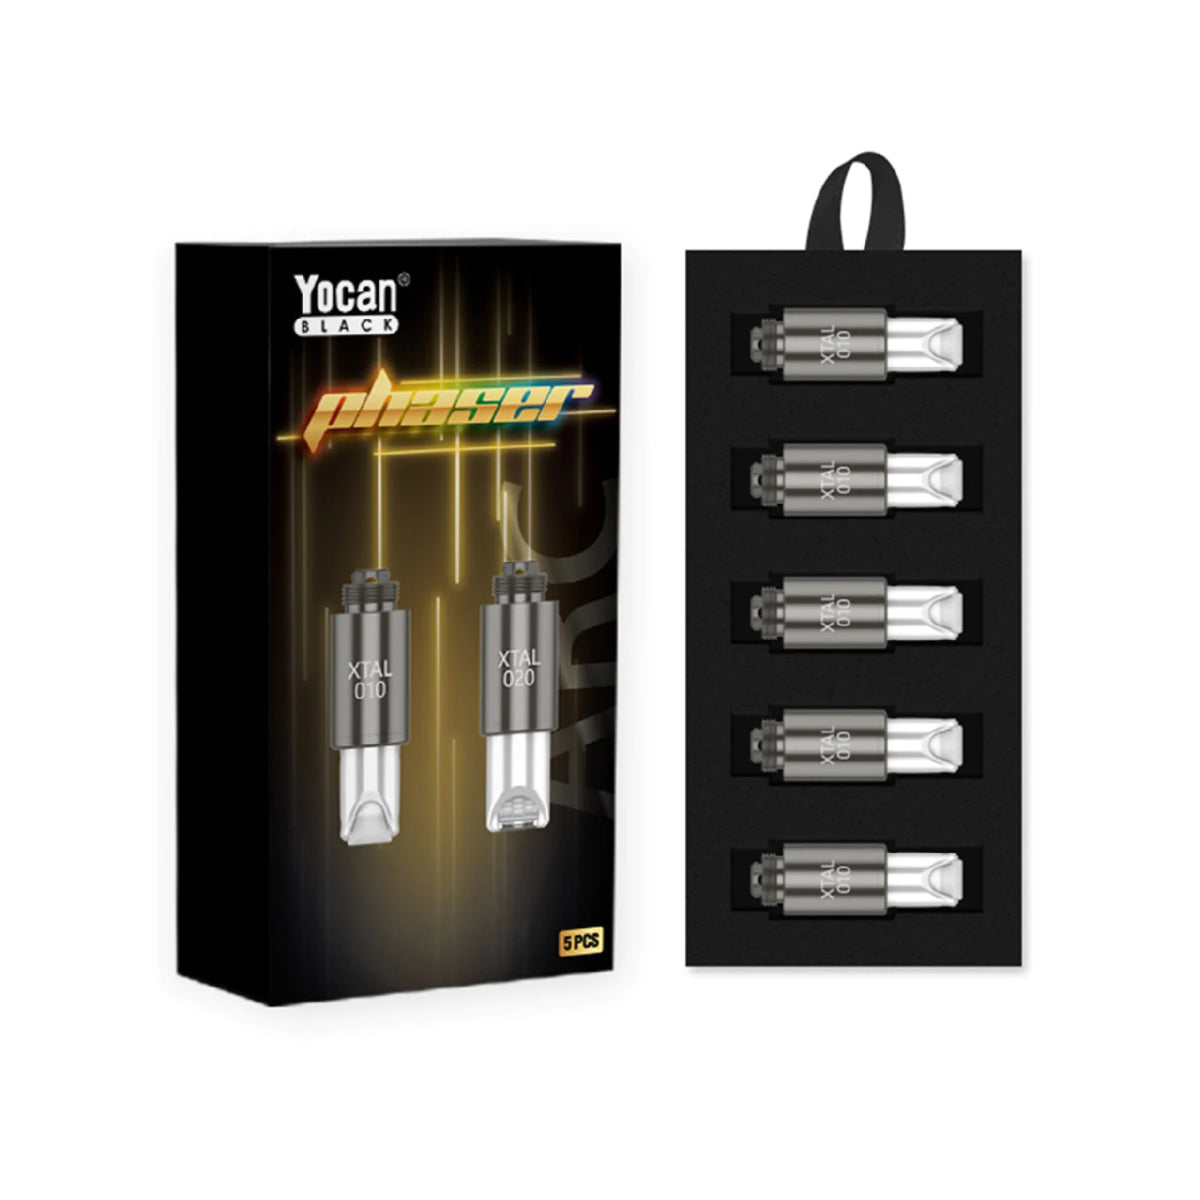 Yocan Black Phaser Arc Replacement XTAL Coil - 5 Pack